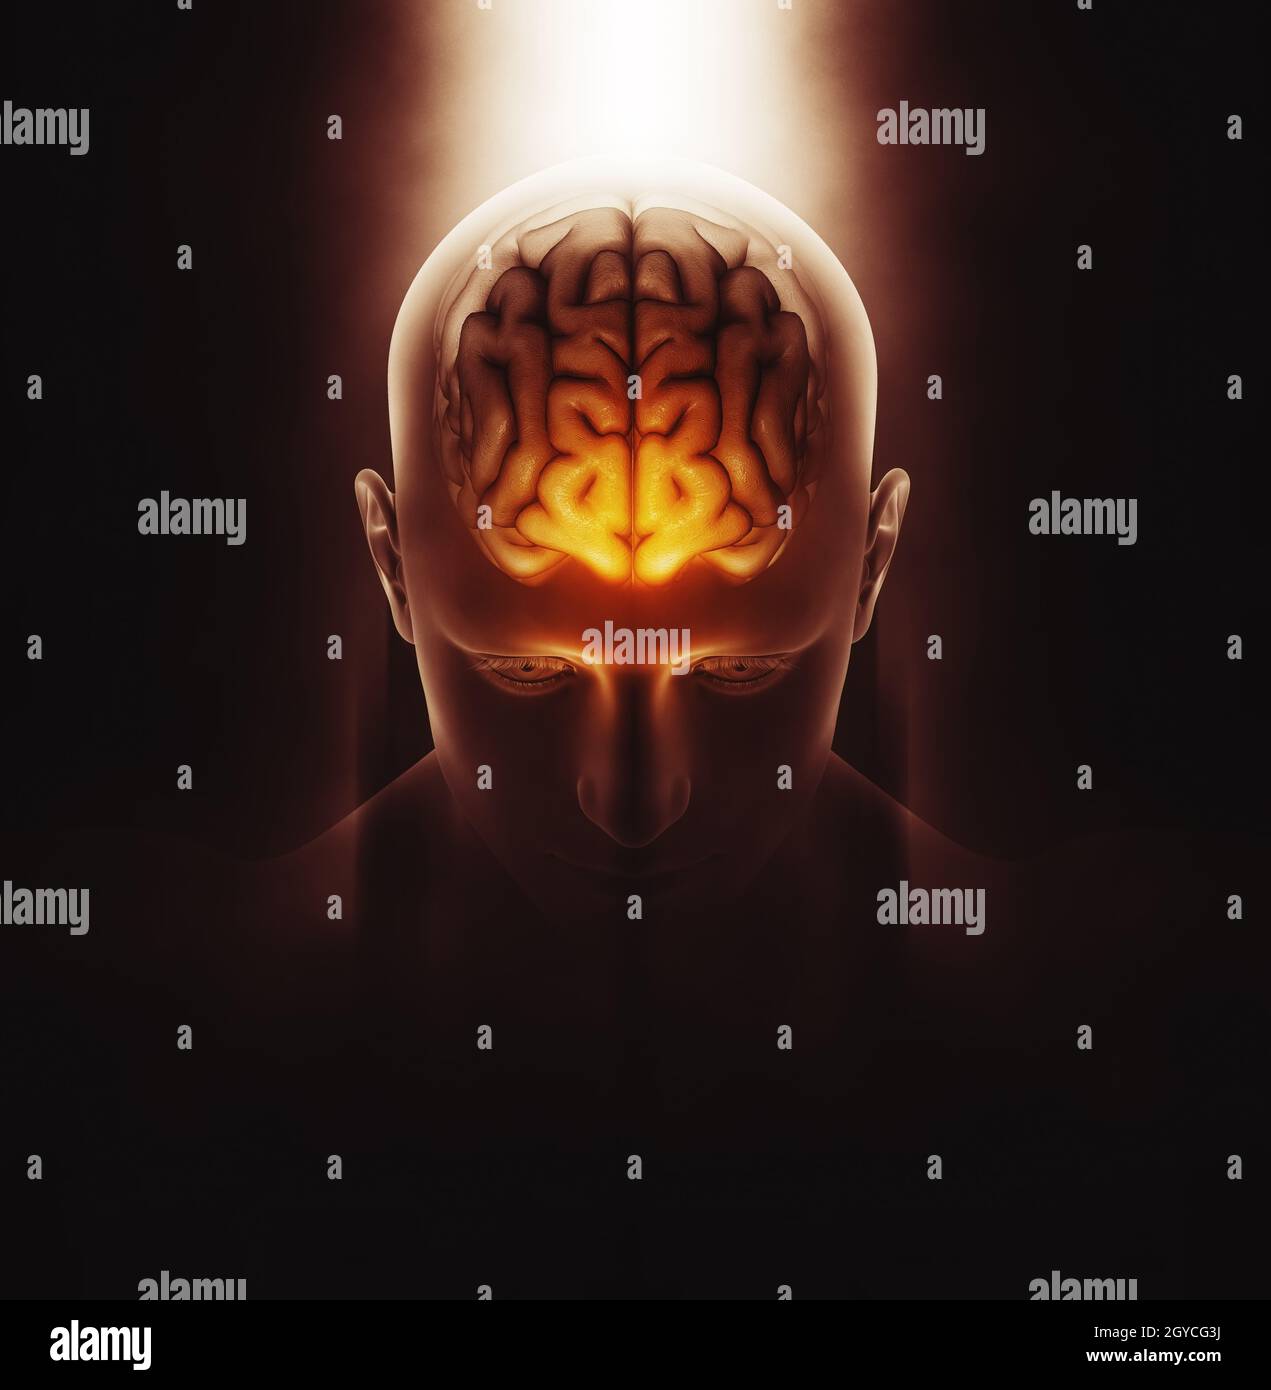 3D render of a medical image of a male figure with brain highlighted and dramatic highlighted Stock Photo